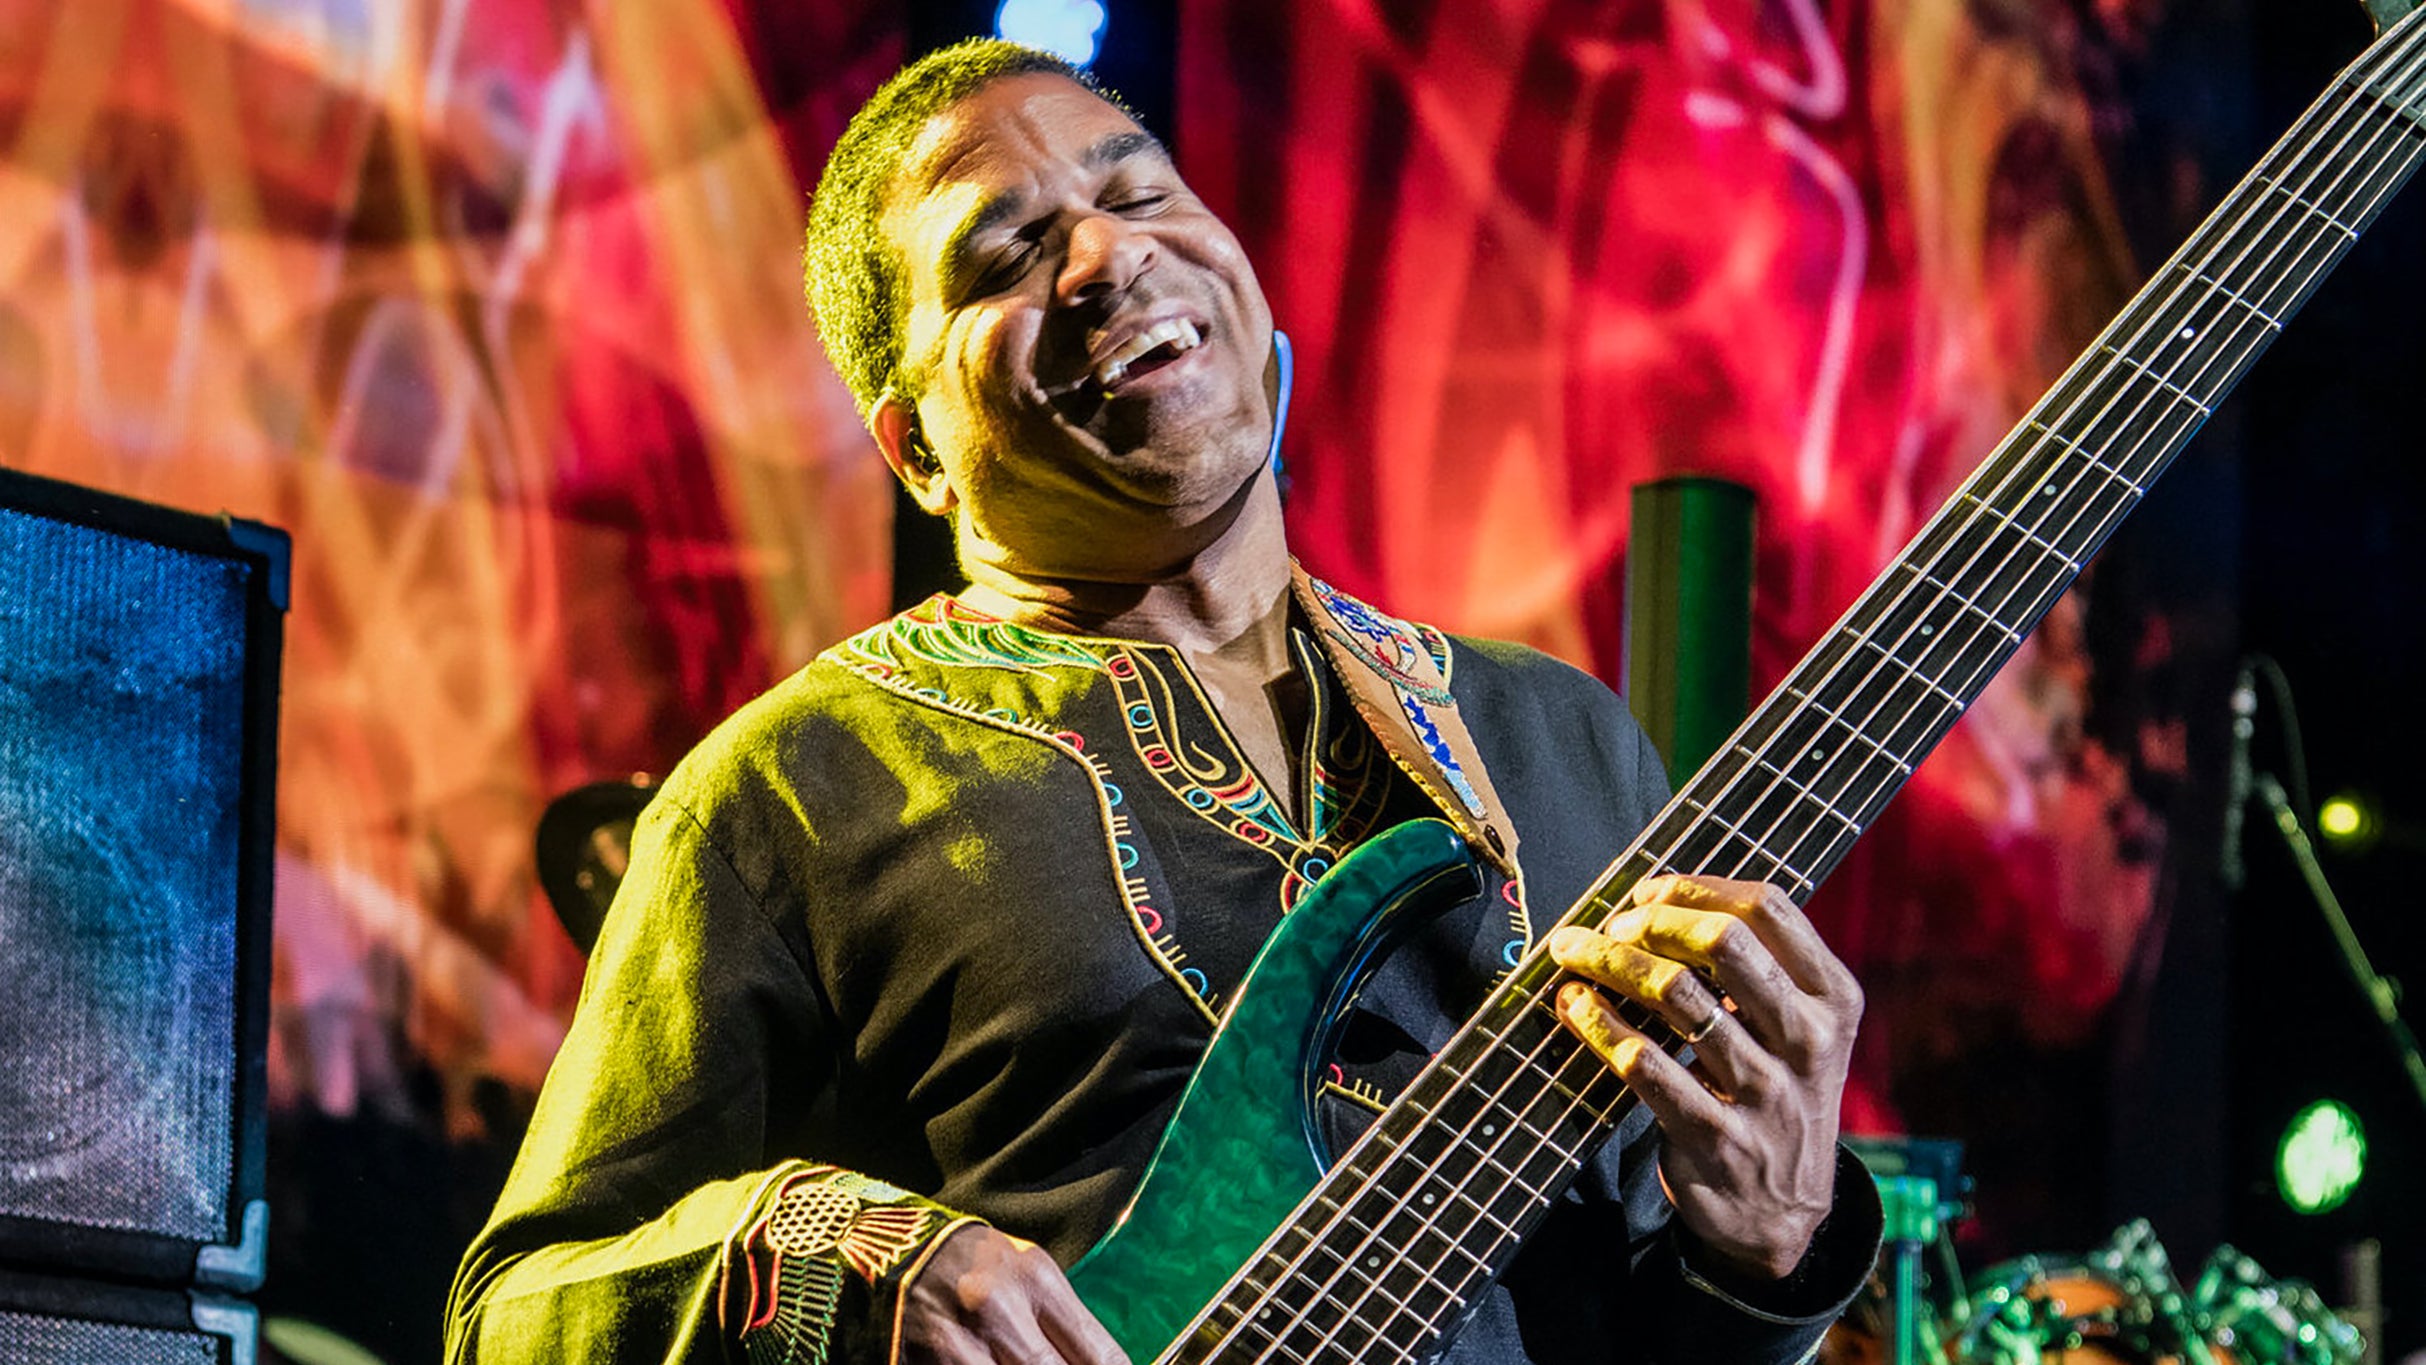 Oteil & Friends in Boston promo photo for Official Platinum presale offer code